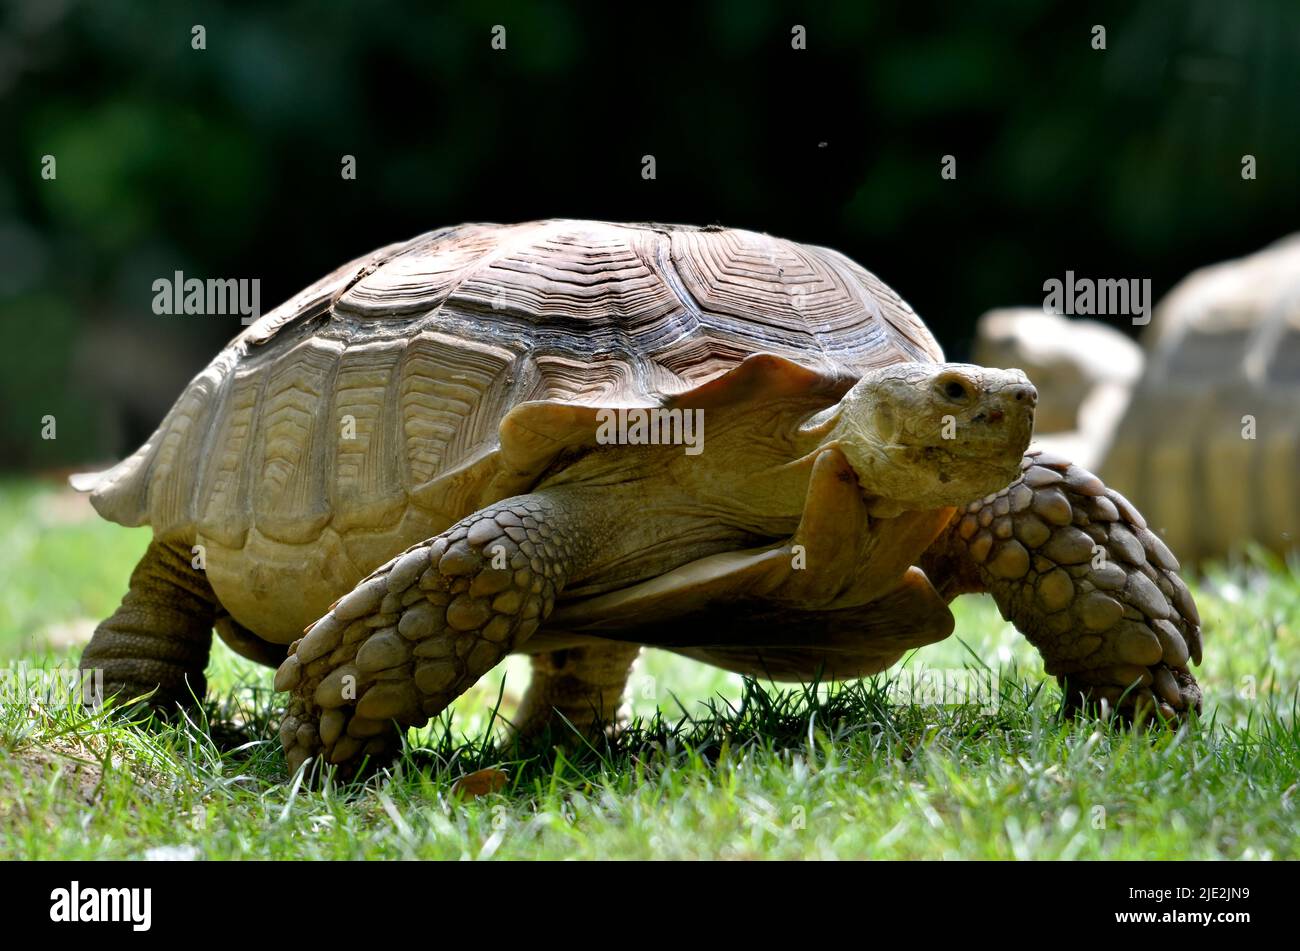 Closeup of male African Spurred Tortoise or sulcata tortoise (Geochelone sulcata) seen from the front at ground level  and walking on grass Stock Photo